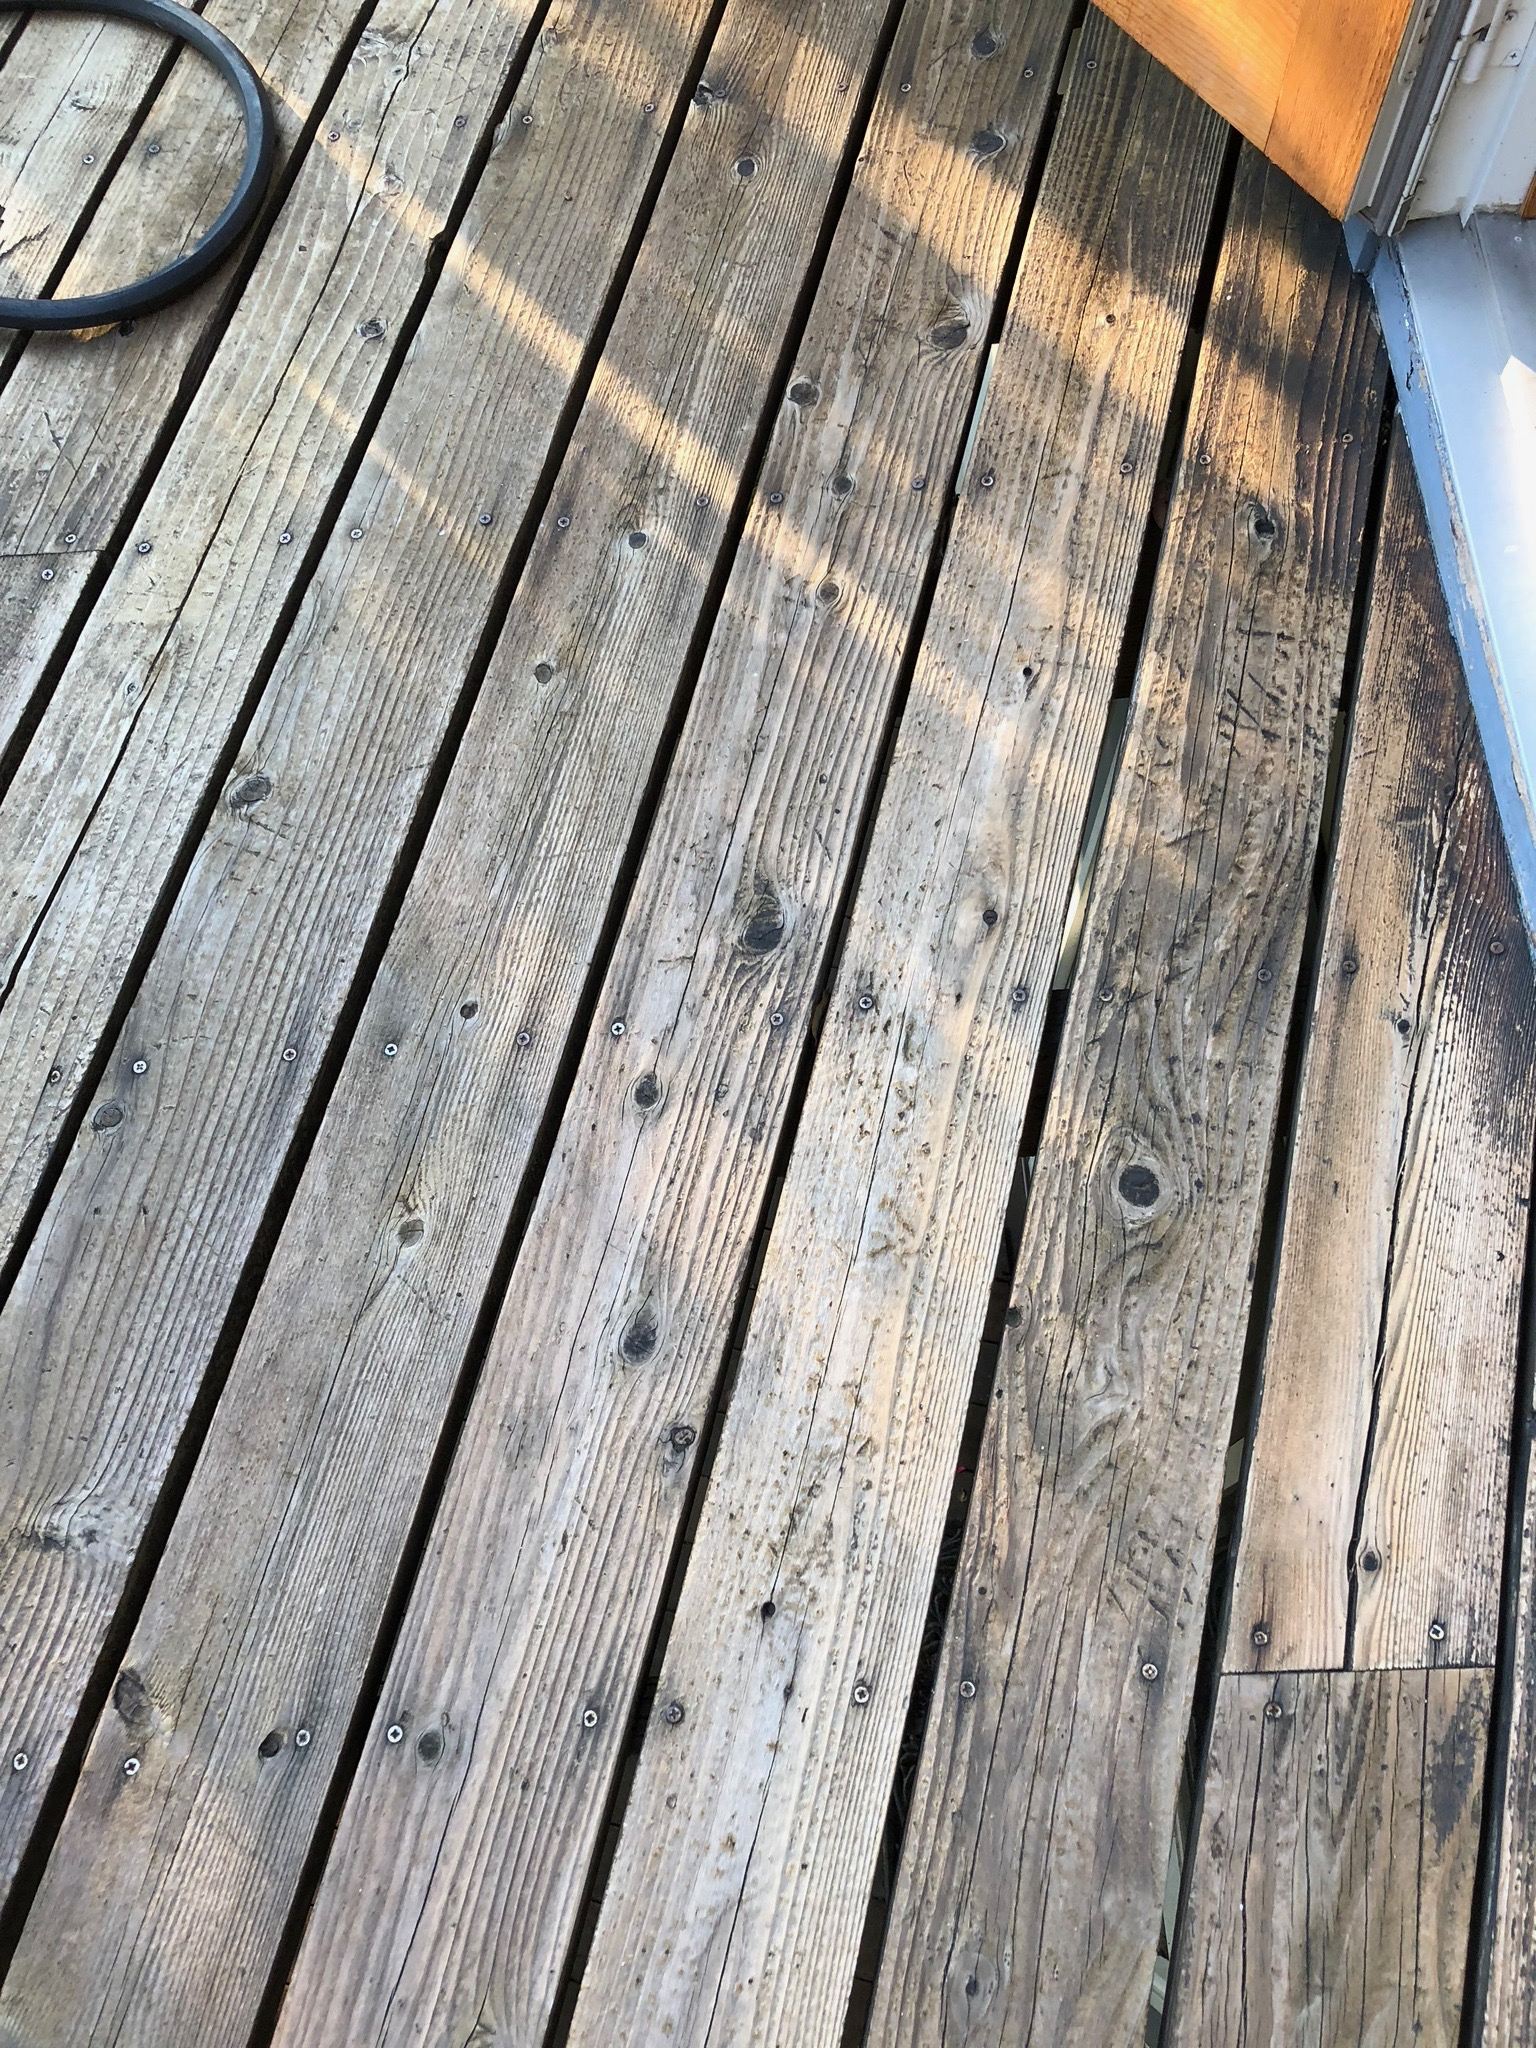 Mold And Mildew On Wood Decks Best Deck Stain Reviews Ratings intended for dimensions 1536 X 2048